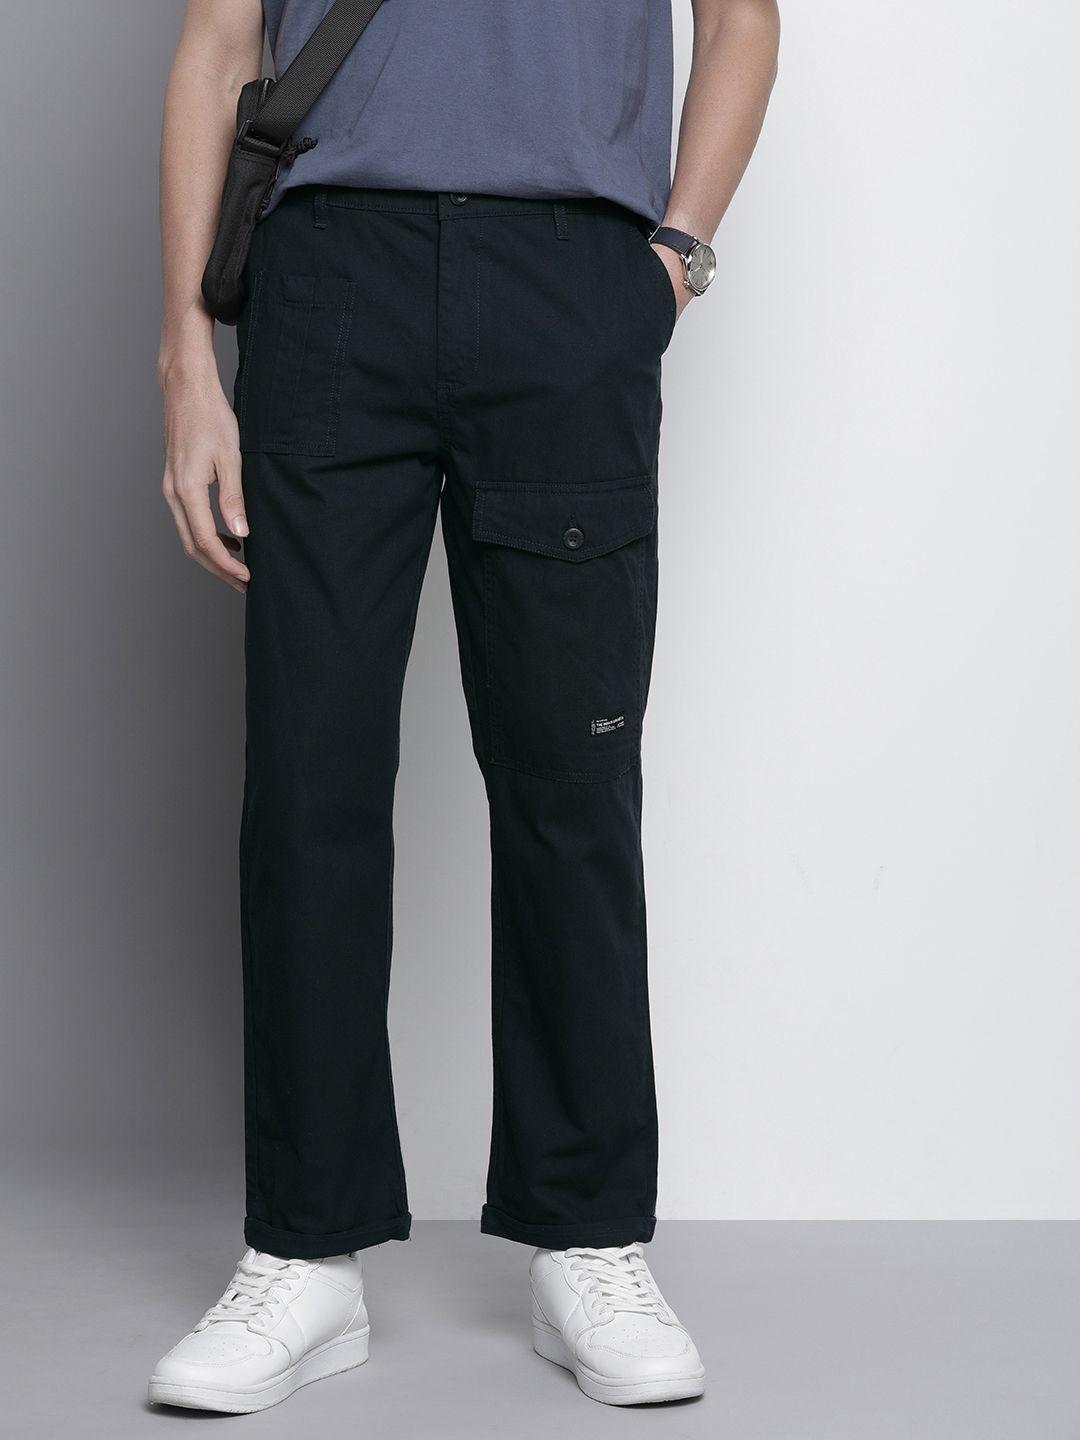 The Indian Garage Co Relaxed Chinos Trousers